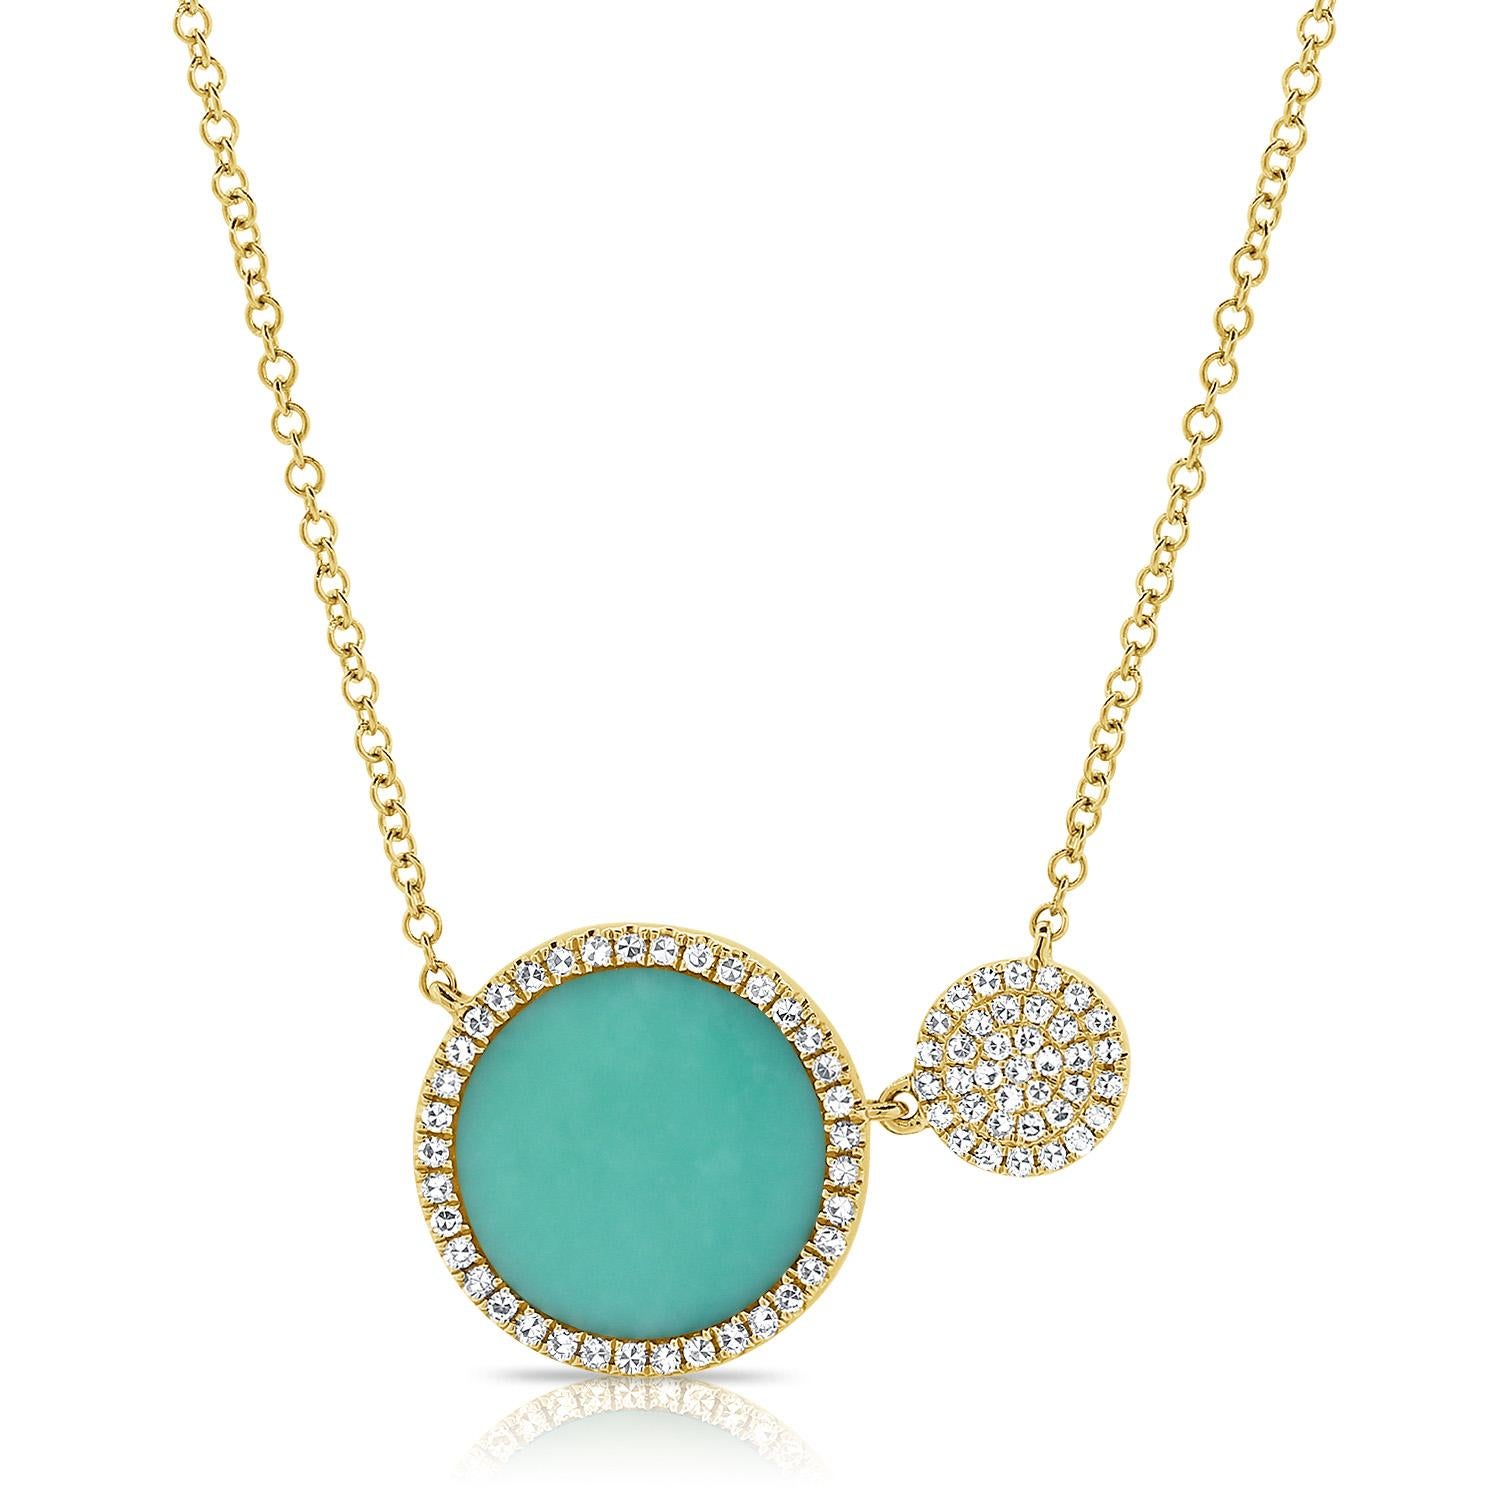 This Beautiful and Vibrant Circle Necklace is crafted of 14K Yellow Gold featuring approximately 0.22 ct. of round Natural Diamonds and a Gorgeous Turquoise 1.68 ct. Circle cut stone. Chain is Adjustable to 16, 17 & 18